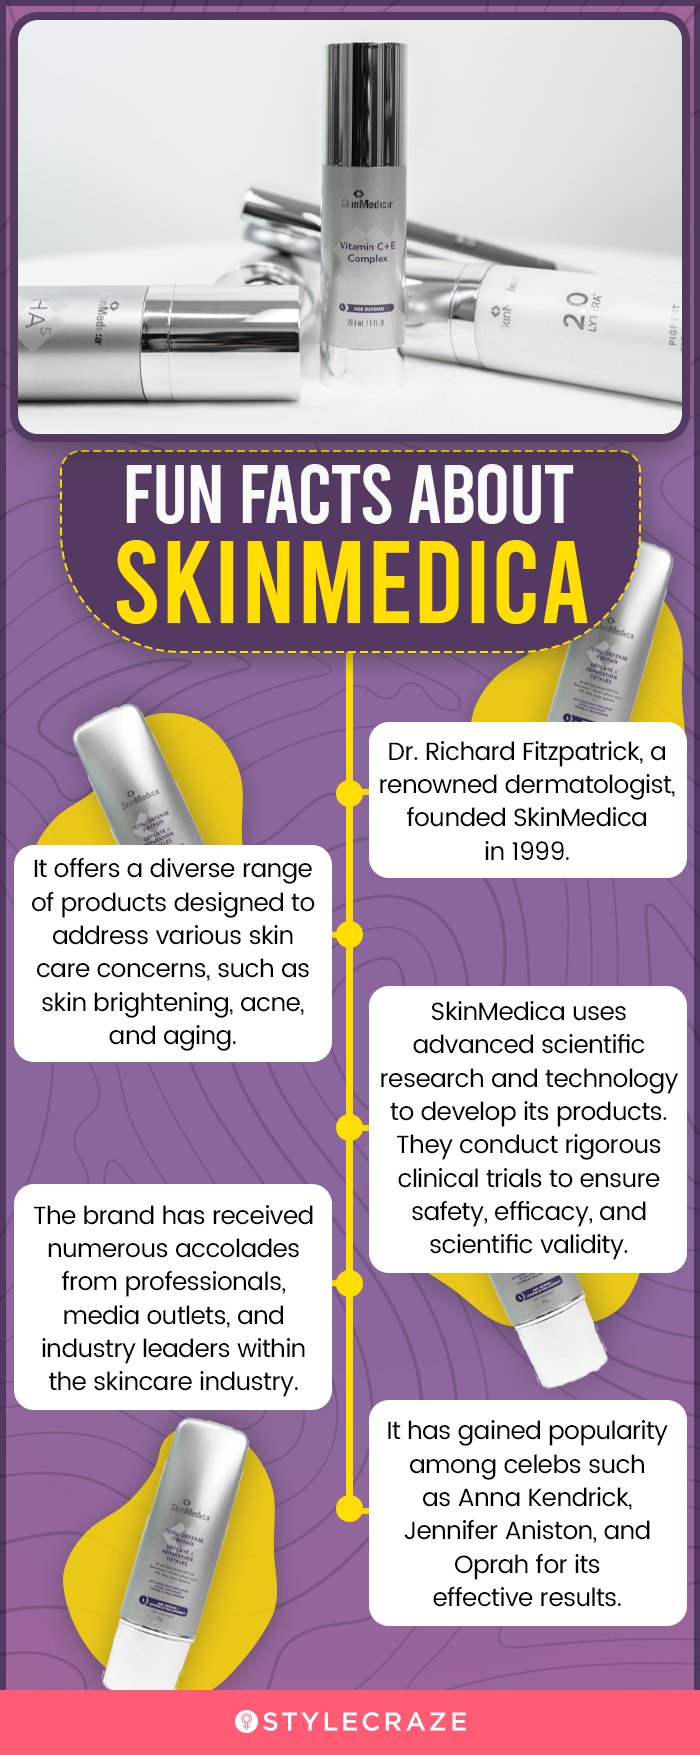 Fun Facts About SkinMedica (infographic)